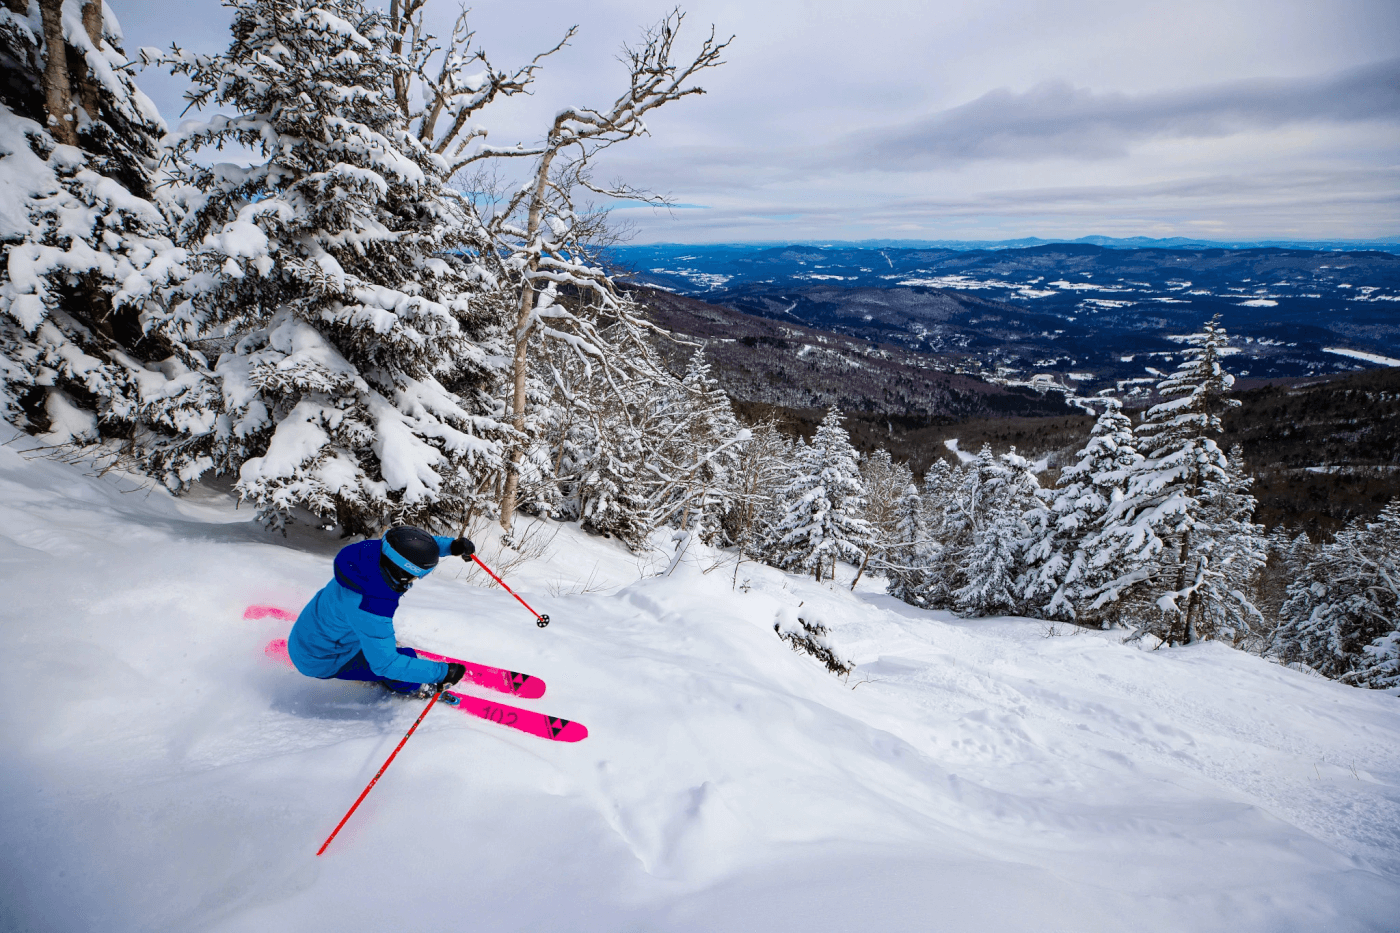 Skier going down a steep powdery run with a scenic mountain view in the background.